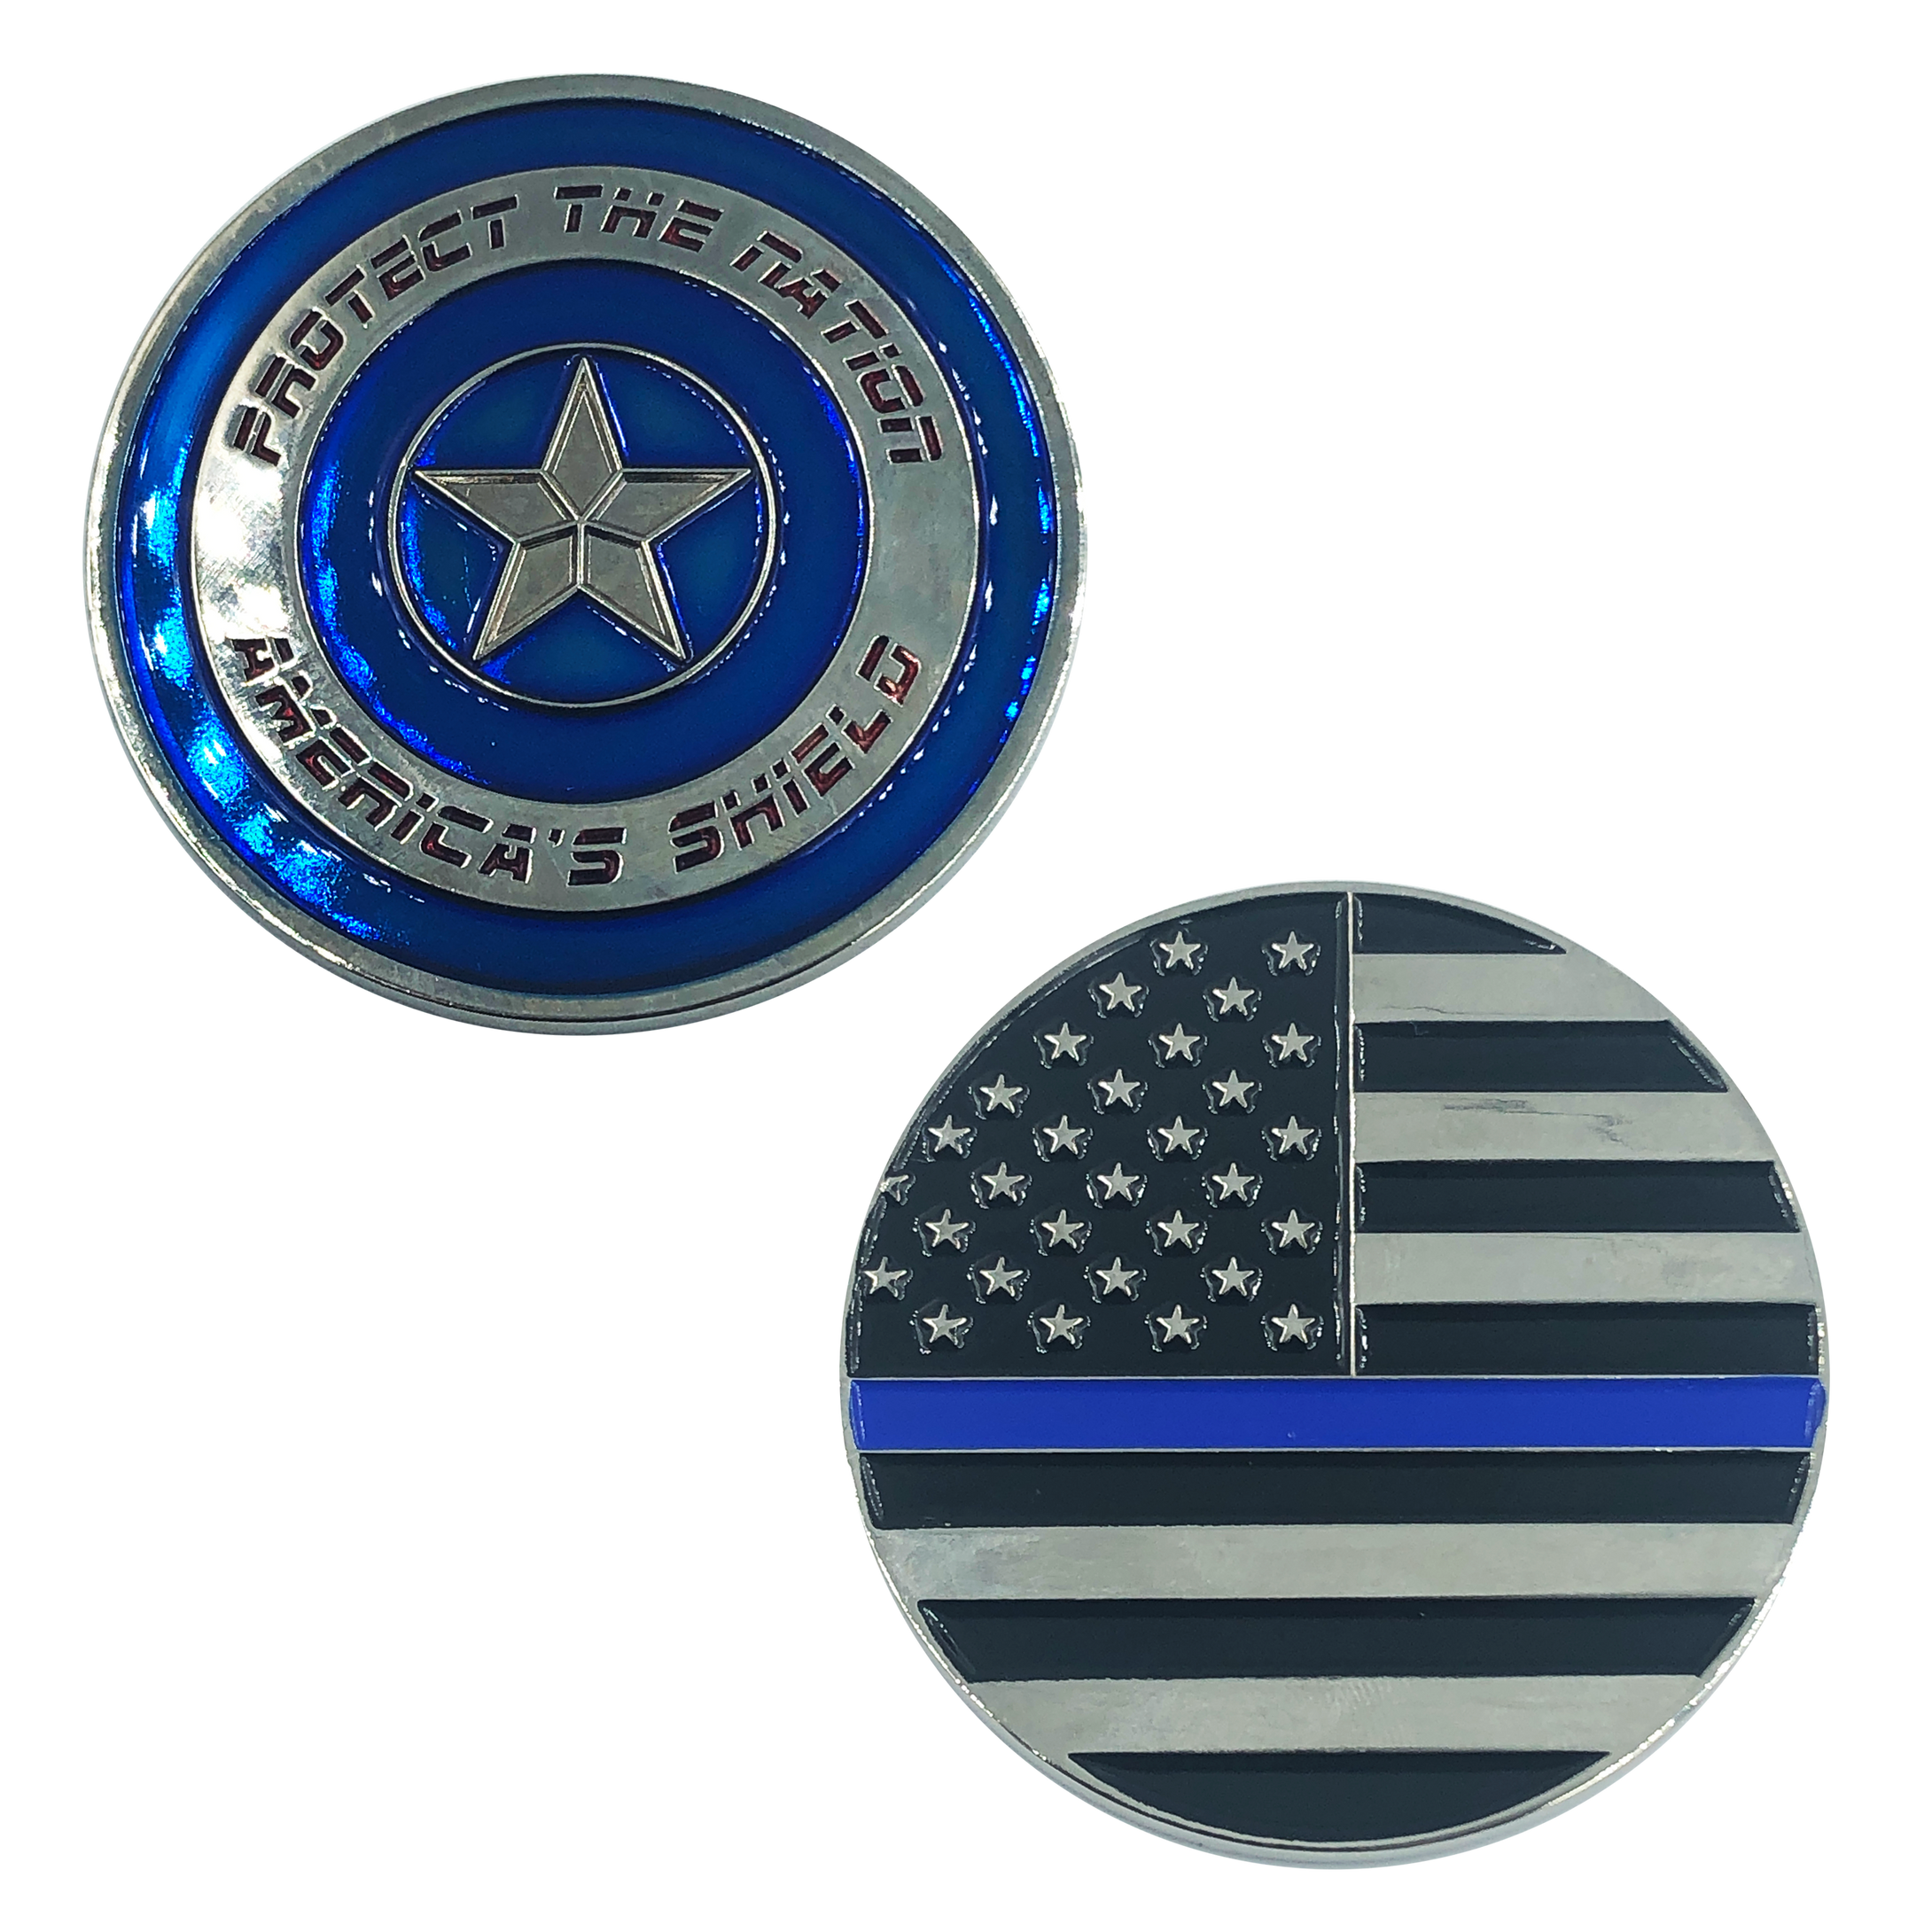 J-011 Thin Blue Captain America Shield Police CBP NYPD ATF LAPD Federal Agent